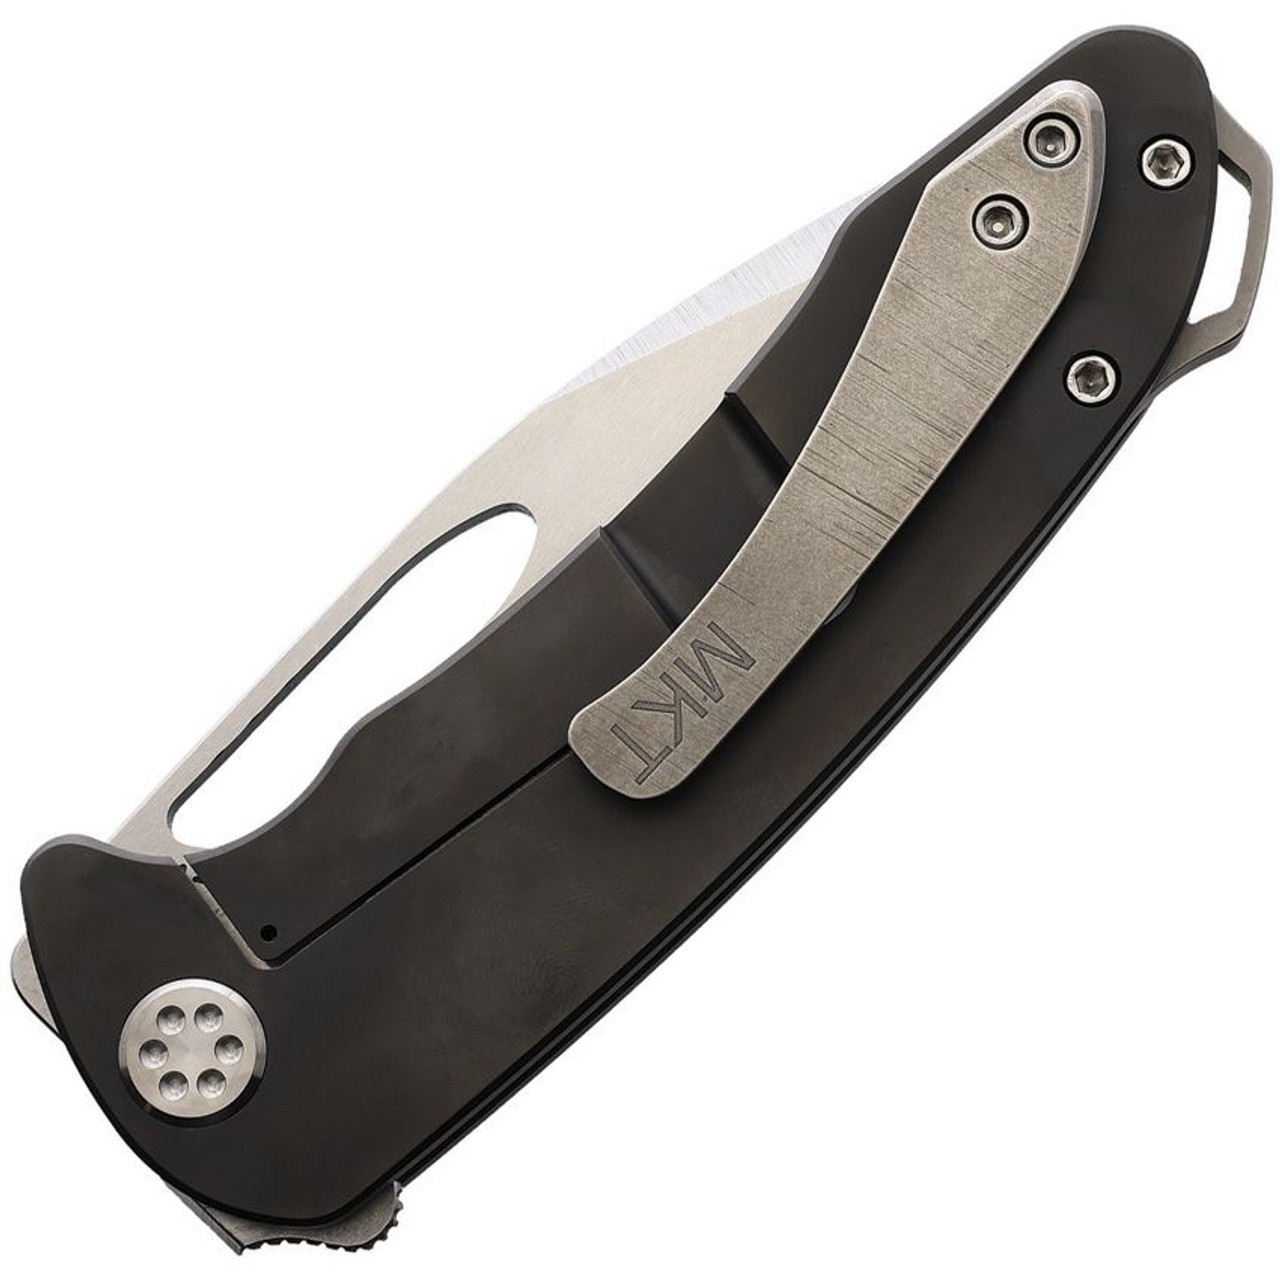 Medford Knife & Tool On Belay Frame Lock Knife (MD038ST30PV) - 4.125in CPM S35VN Tumbled Drop Point Blade, Grey PVD Coated Titanium Handle